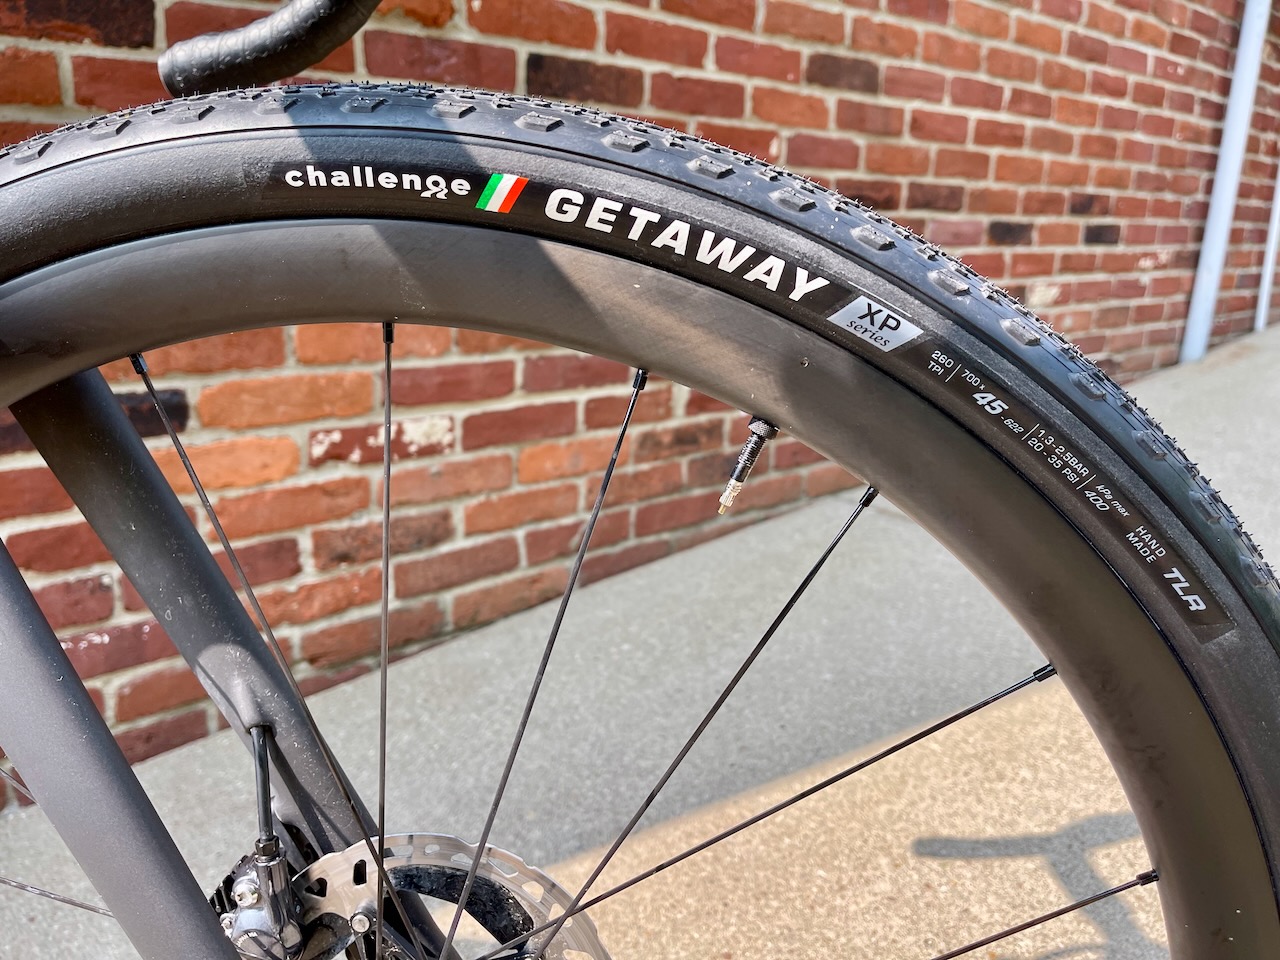 All-New Challenge Getaway XP Gravel Tire Offers Tubular Comfort with Extra Protection